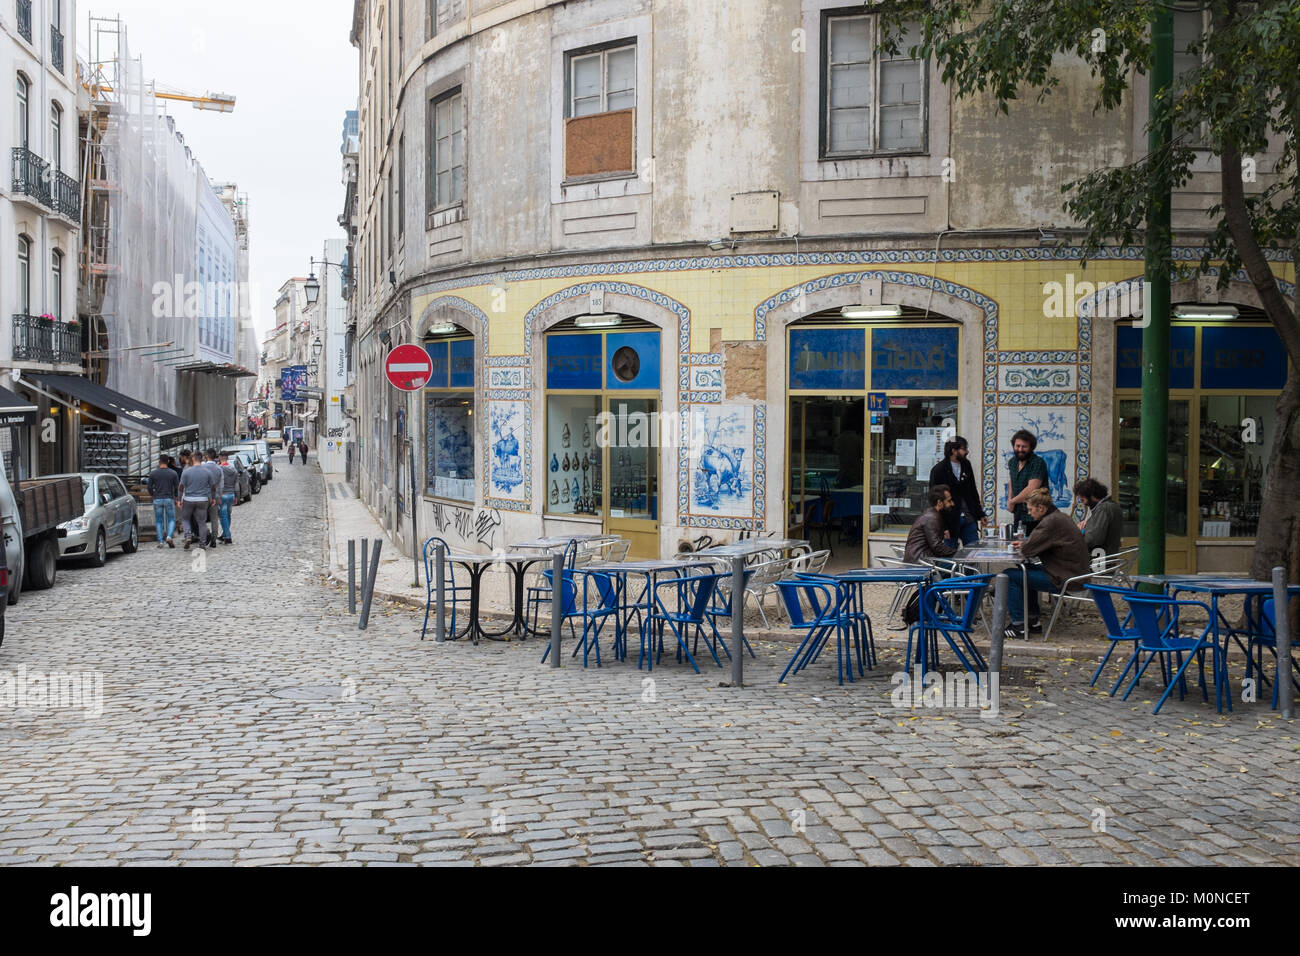 Traditional cafe on a cobbled street with outdoor tables and chairs in Lisbon, Portugal Stock Photo